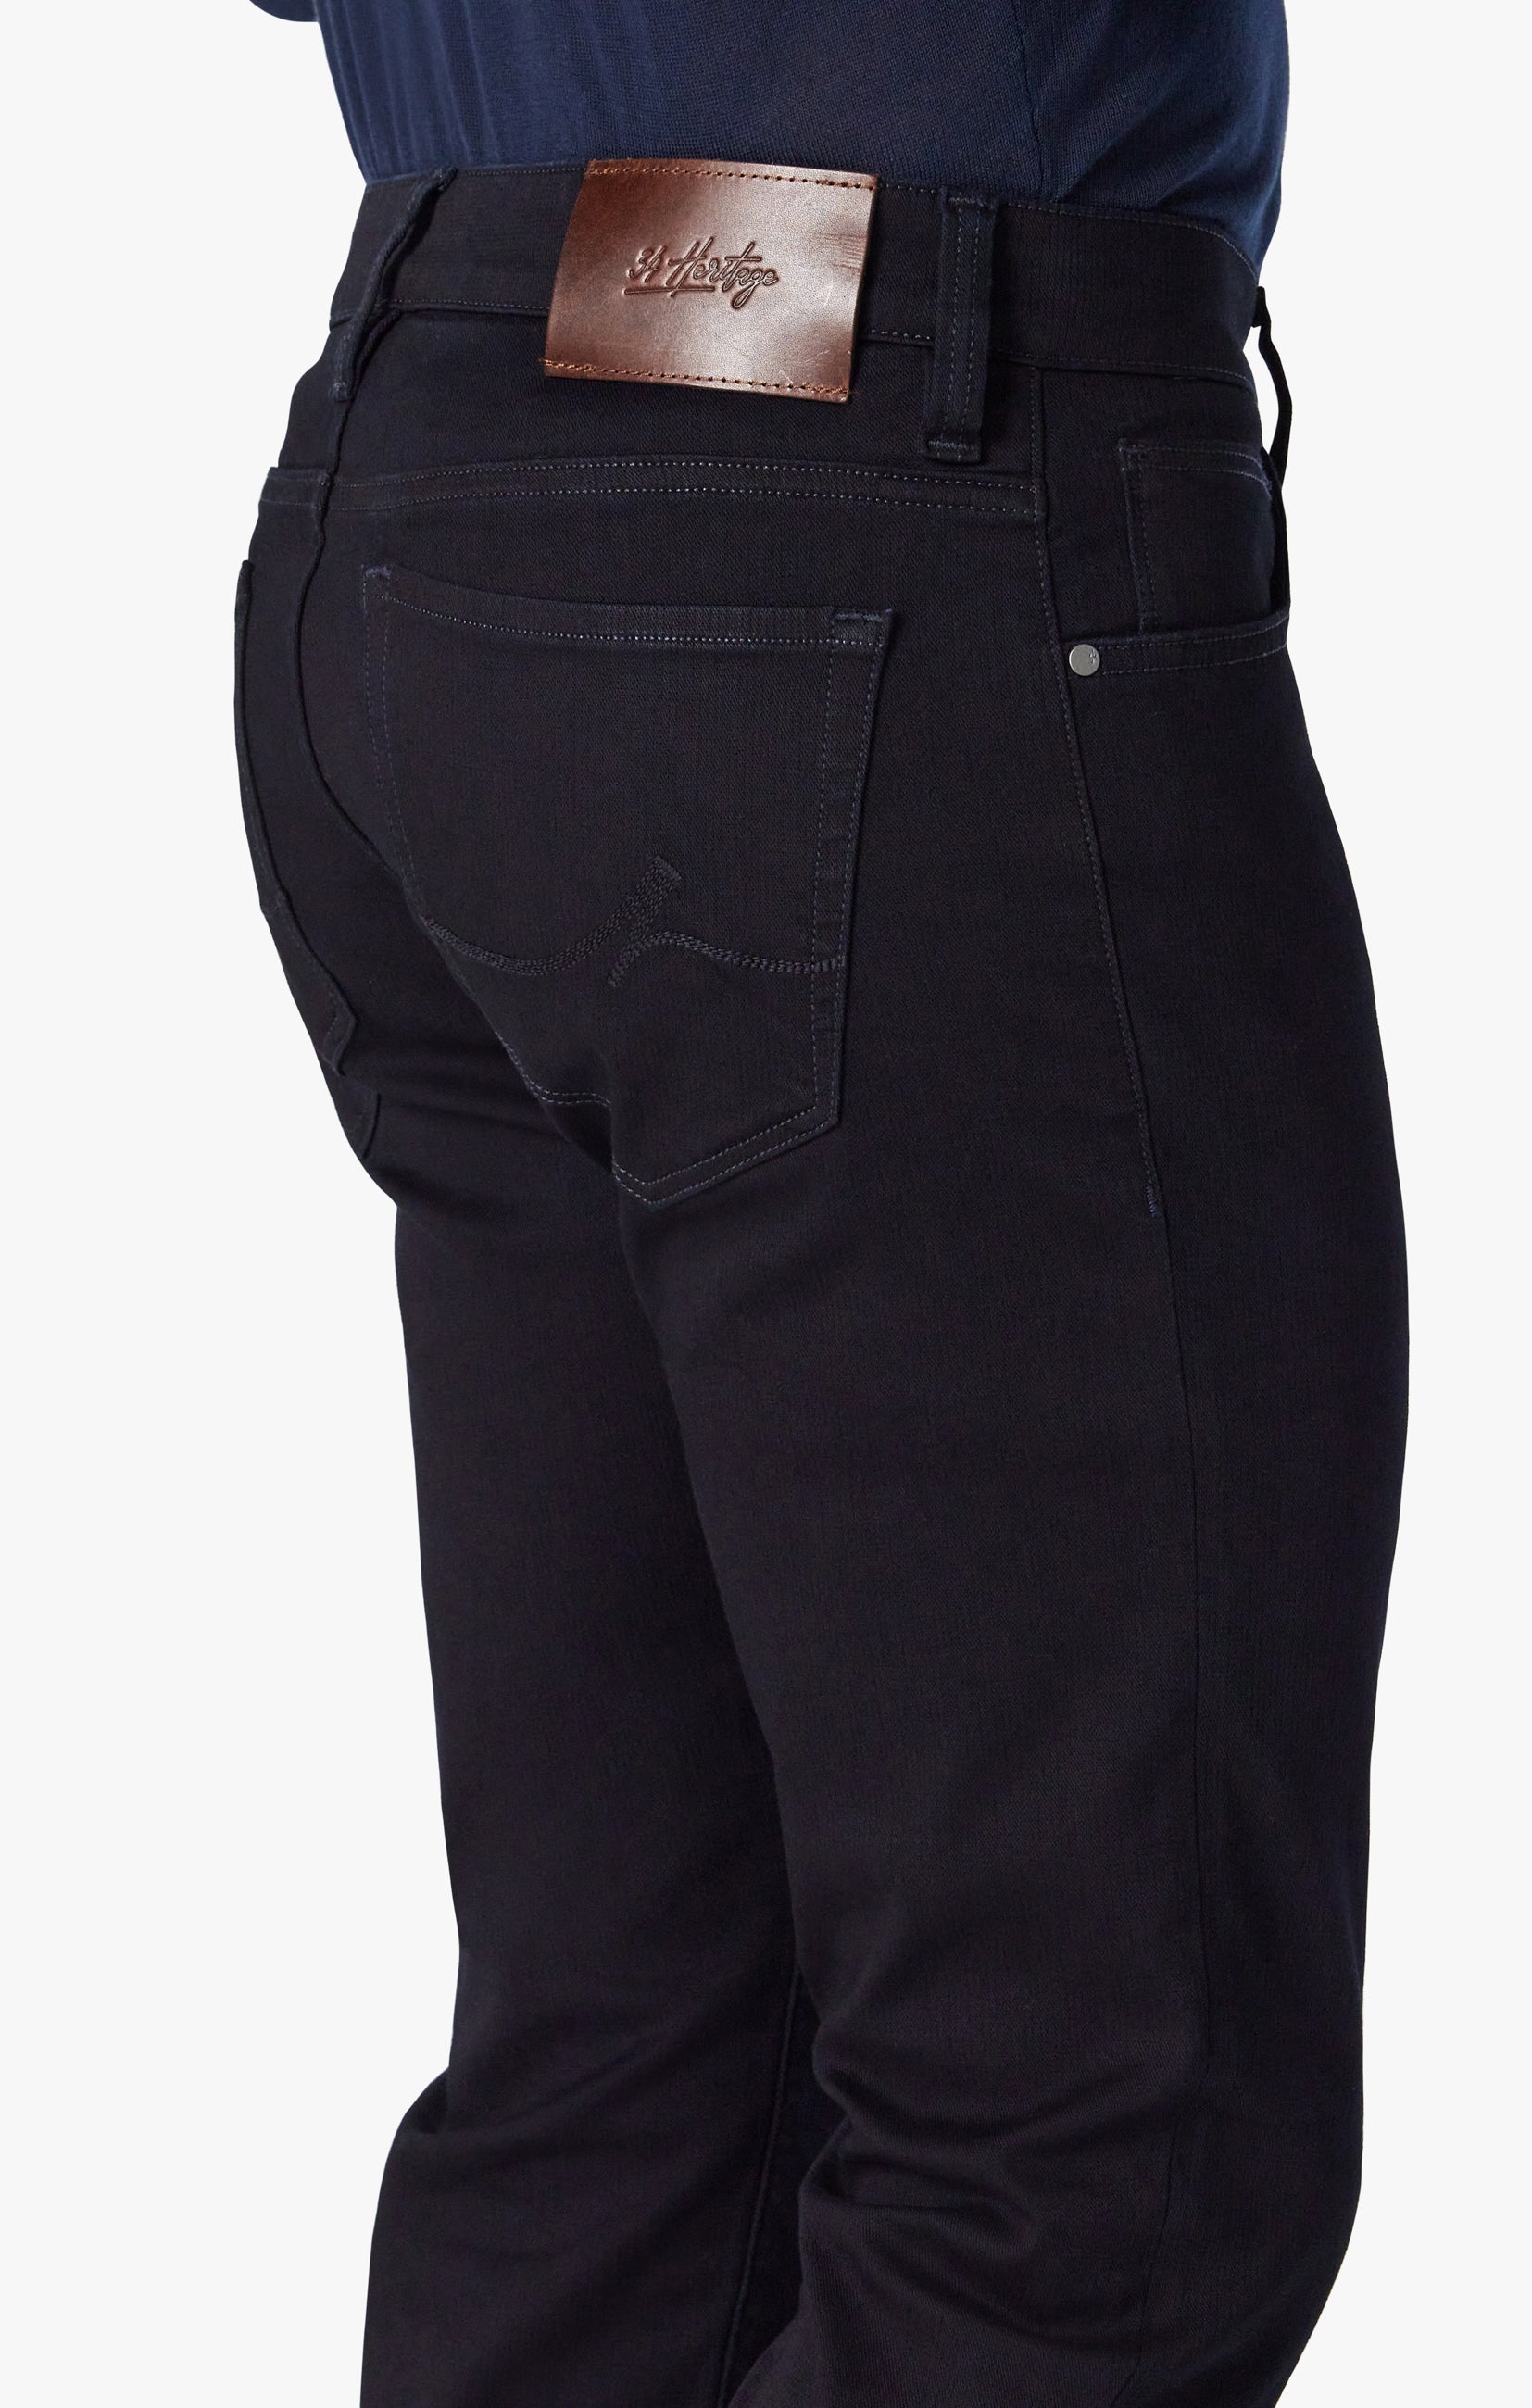 Calm Skinny Leg Jeans in Rinse Structure Image 5